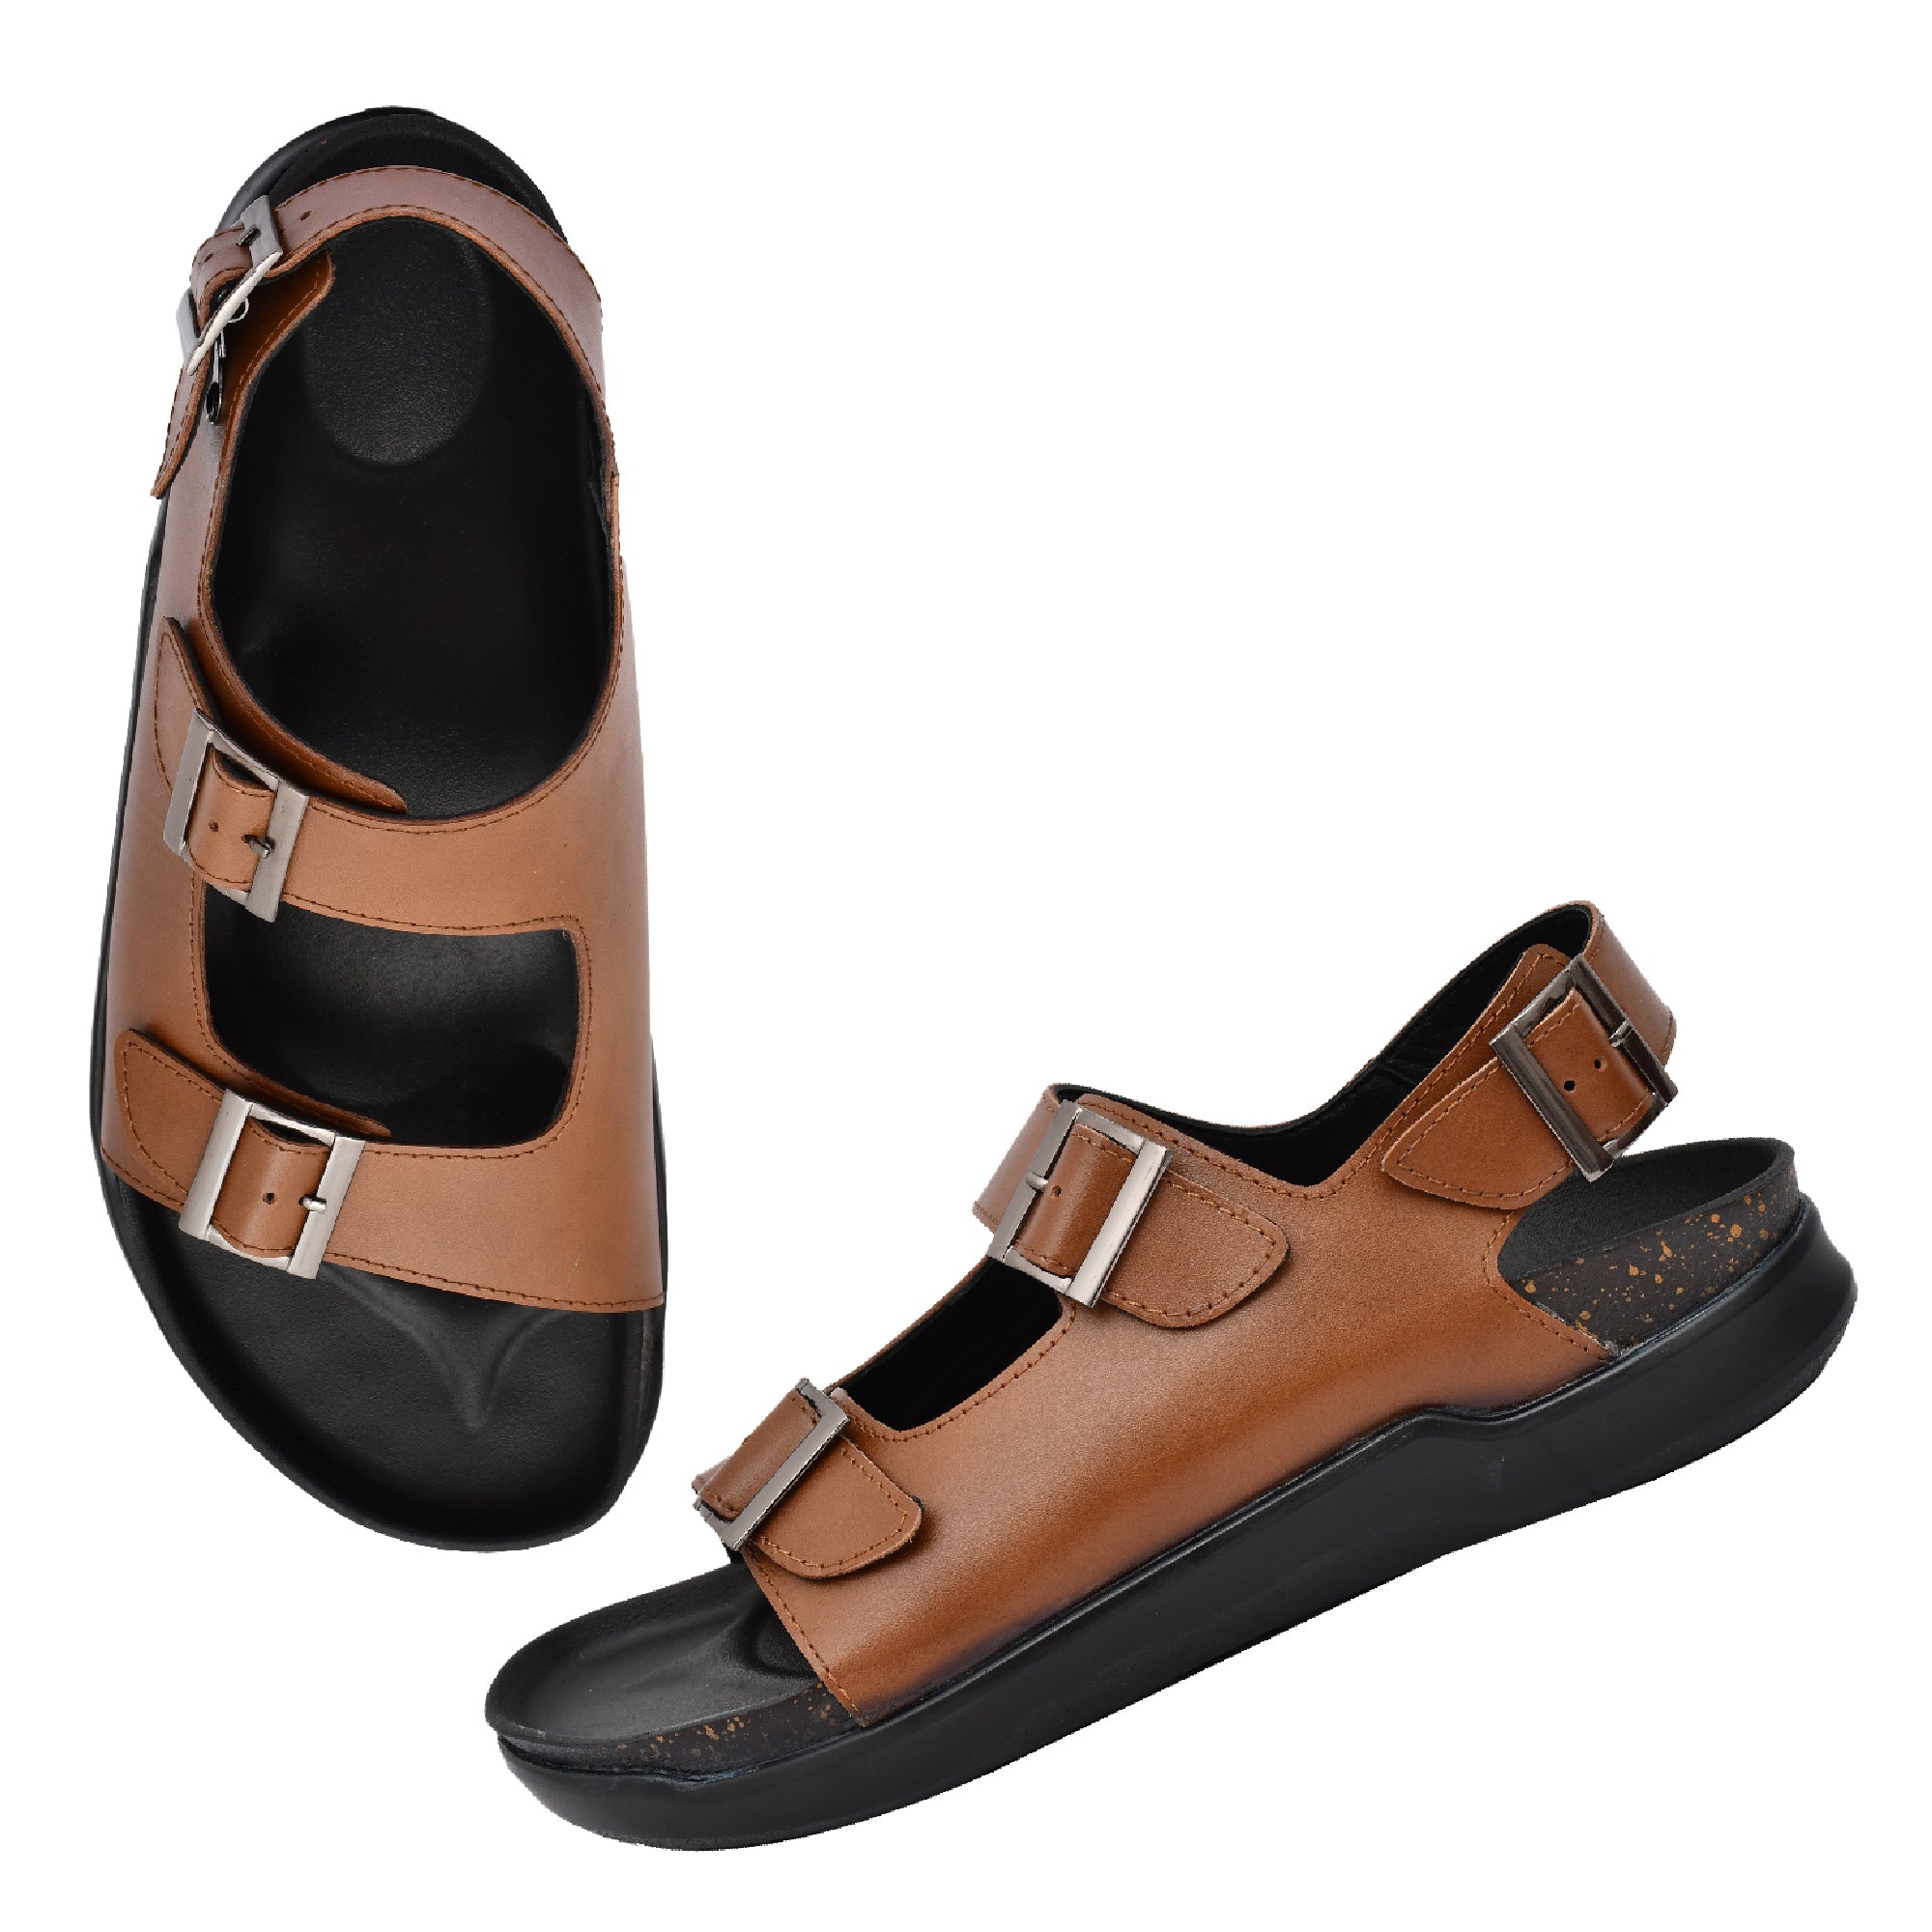 Leather Sandal for men's countrymaddox